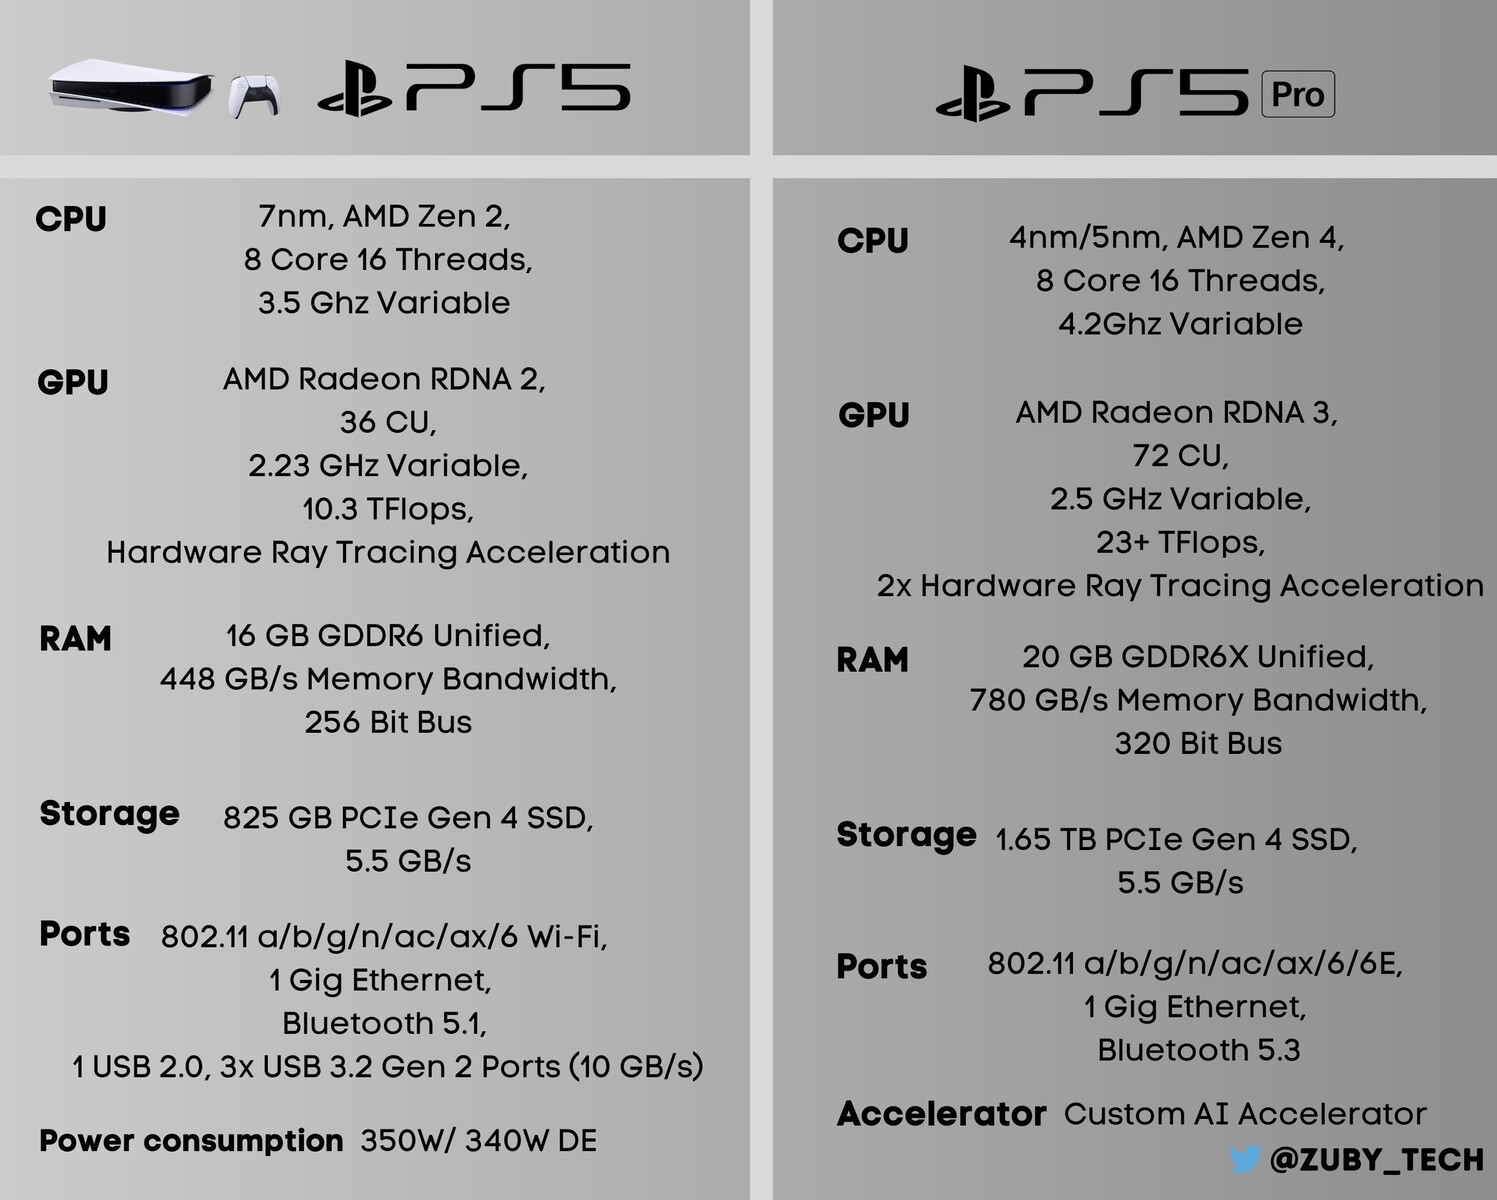 PS5 Pro: what can we expect?